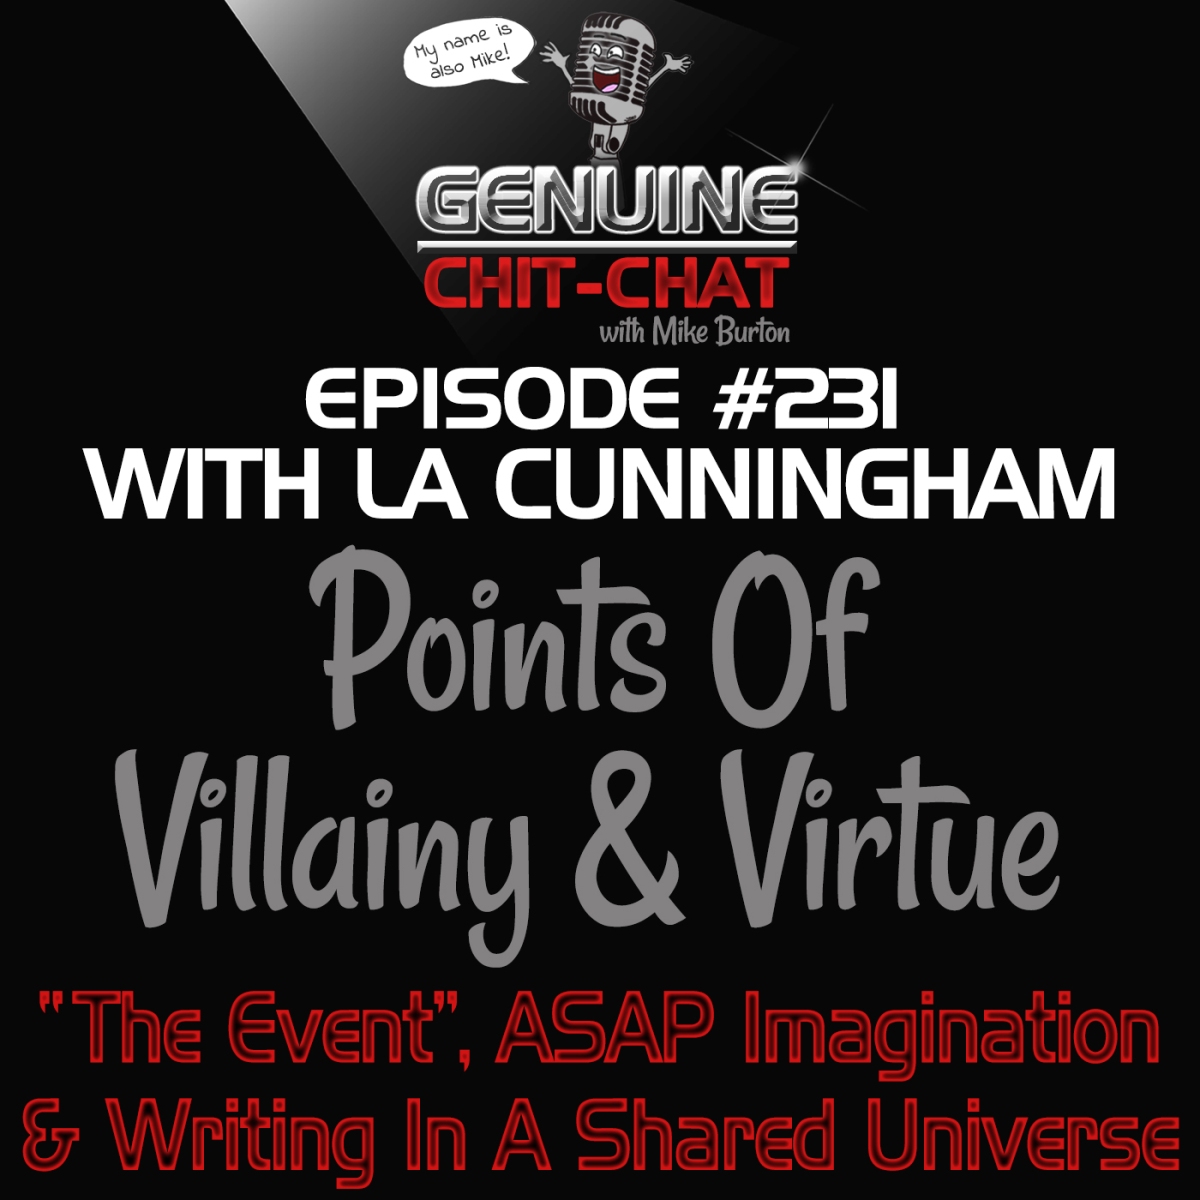 #231 – Points Of Villainy & Virtue: “The Event”, ASAP Imagination & Writing In A Shared Universe With Laurie “LA” Cunningham